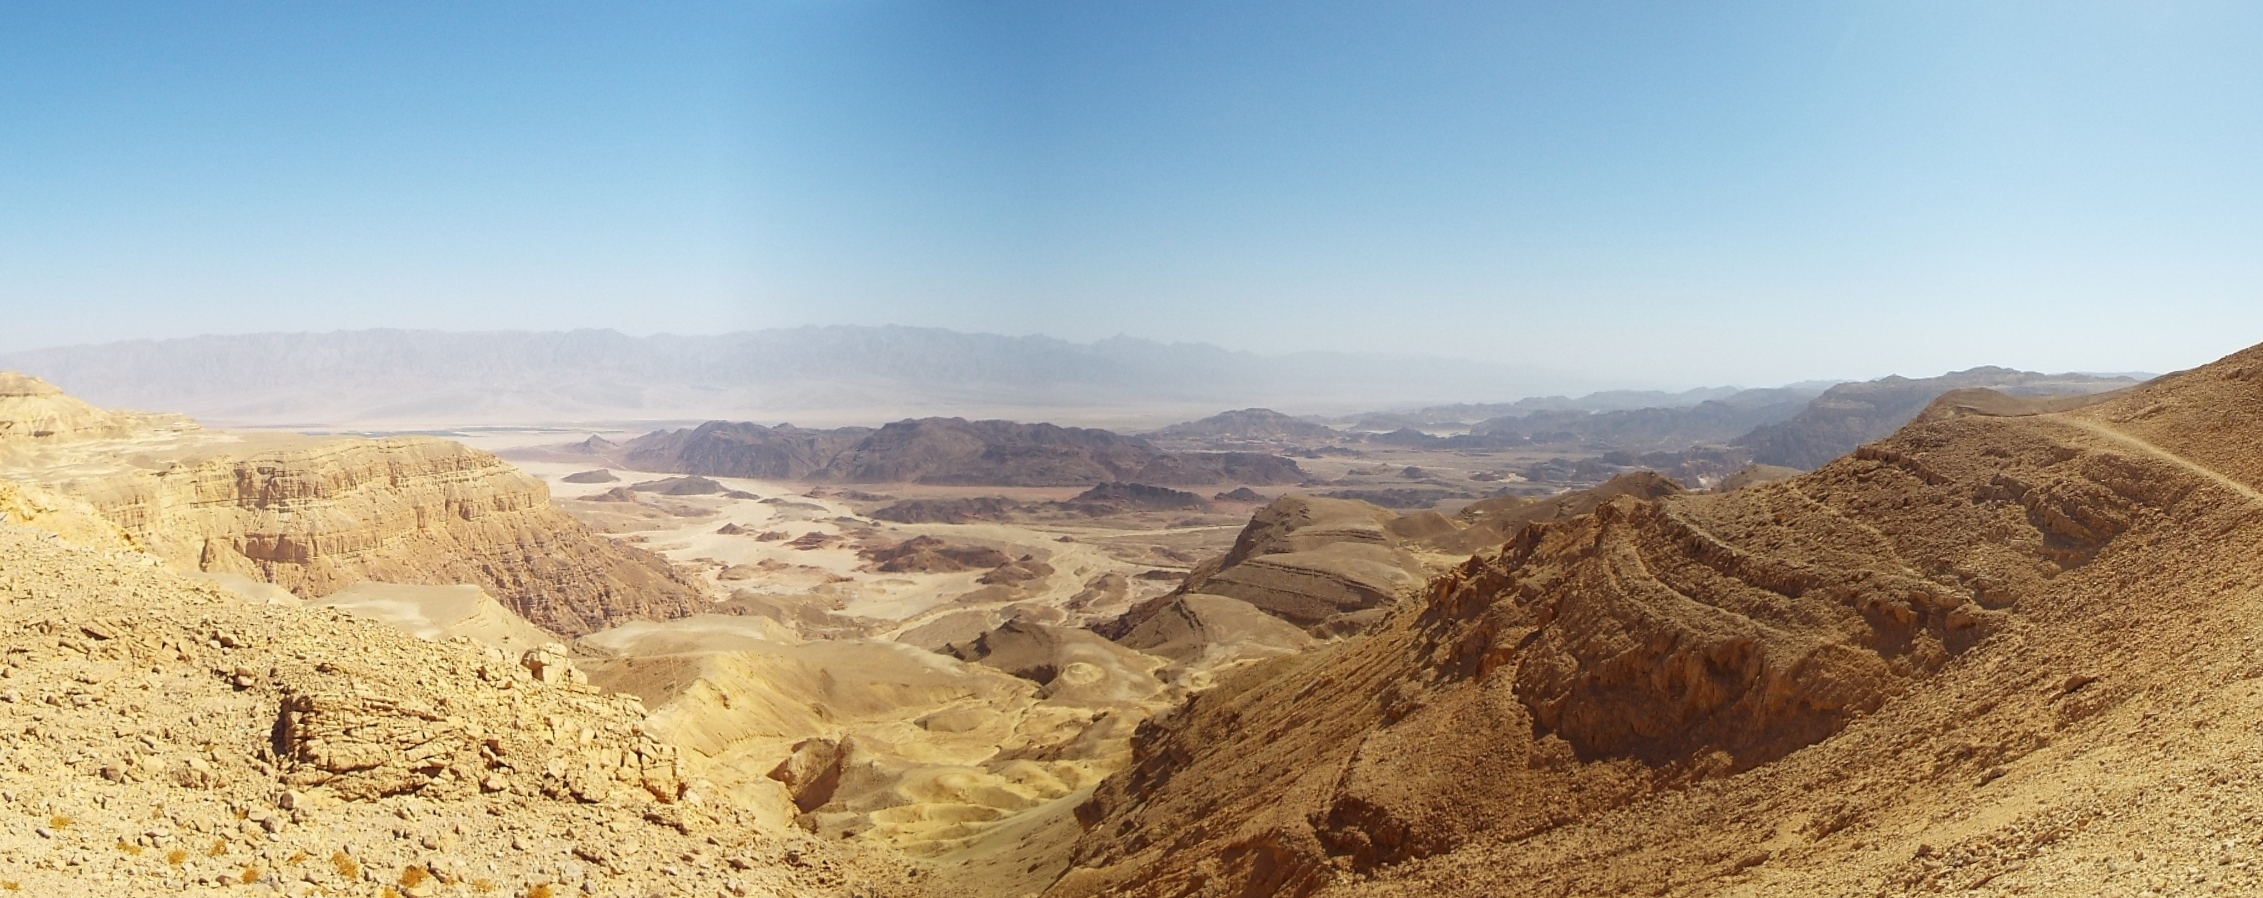 Panoramic view of Timna Valley engravings